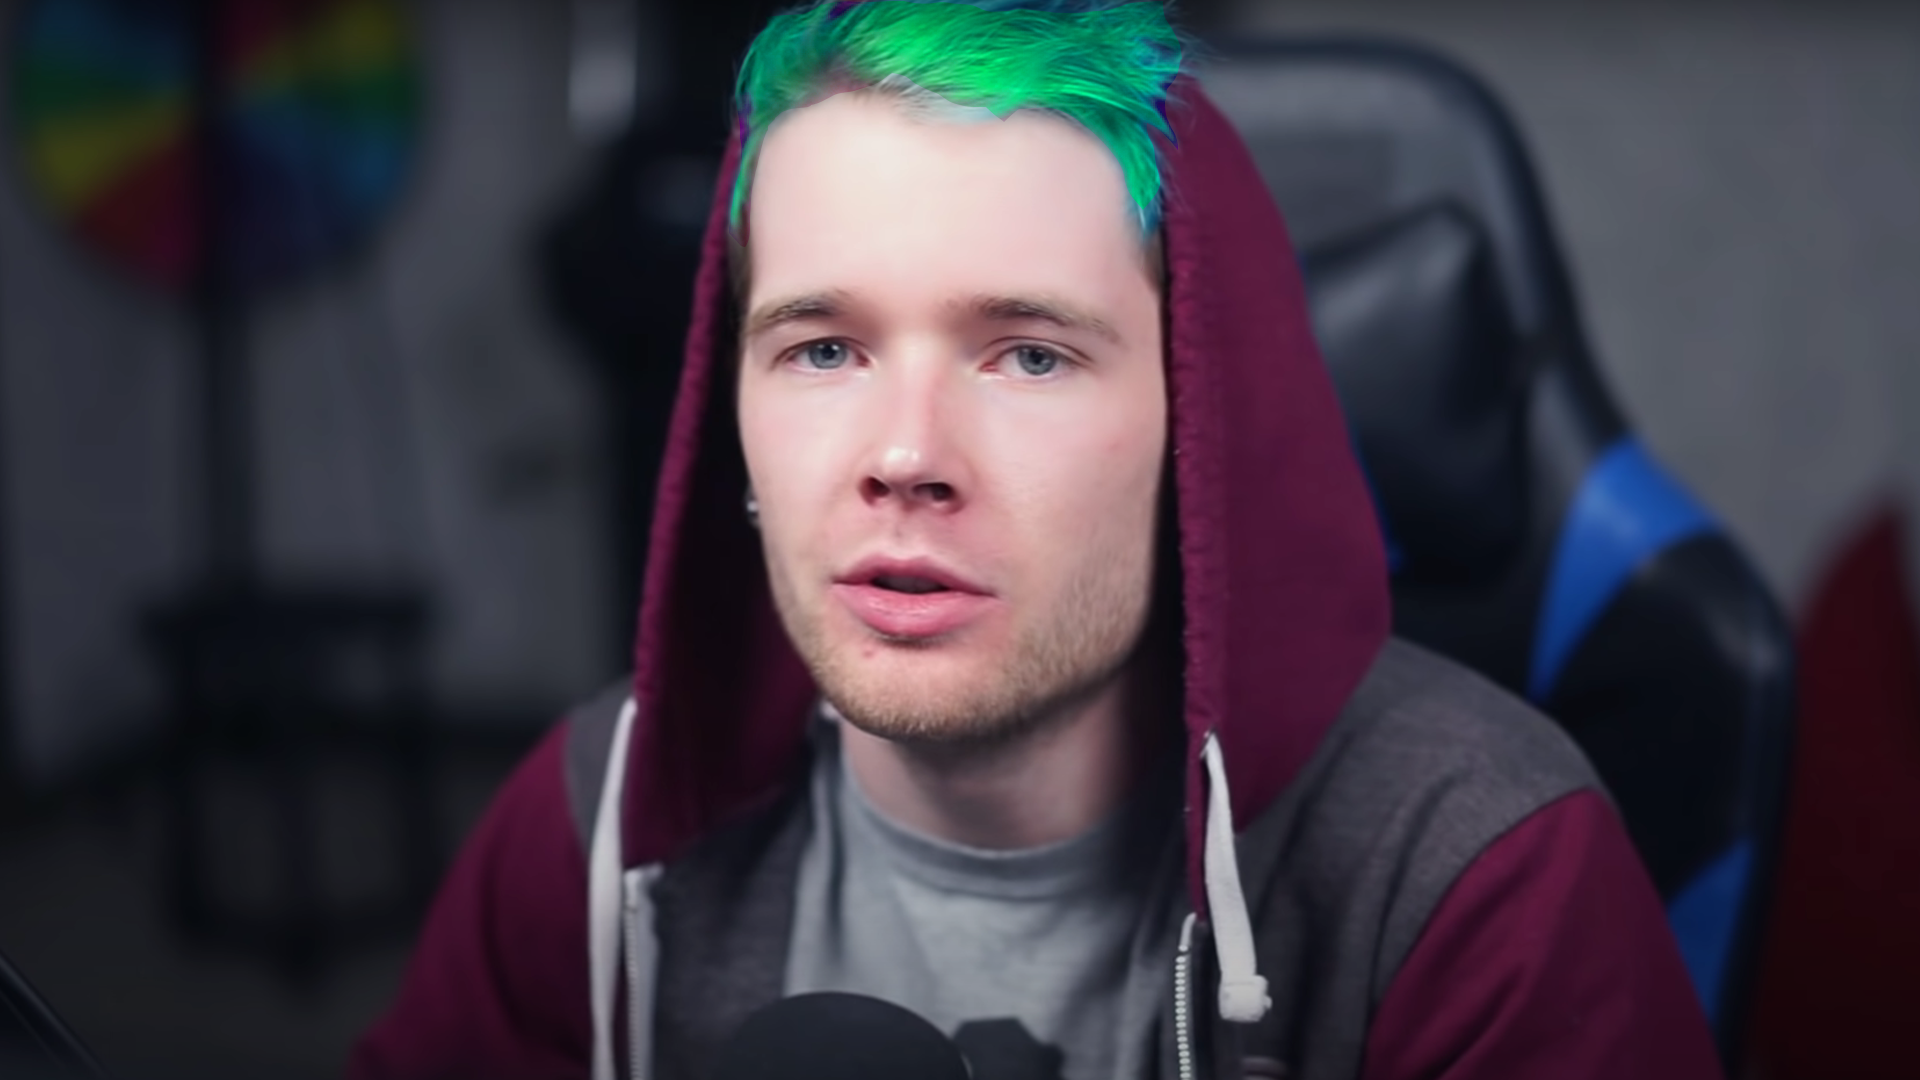 8. Dantdm's Blue and Pink Hair in Real Life - wide 1